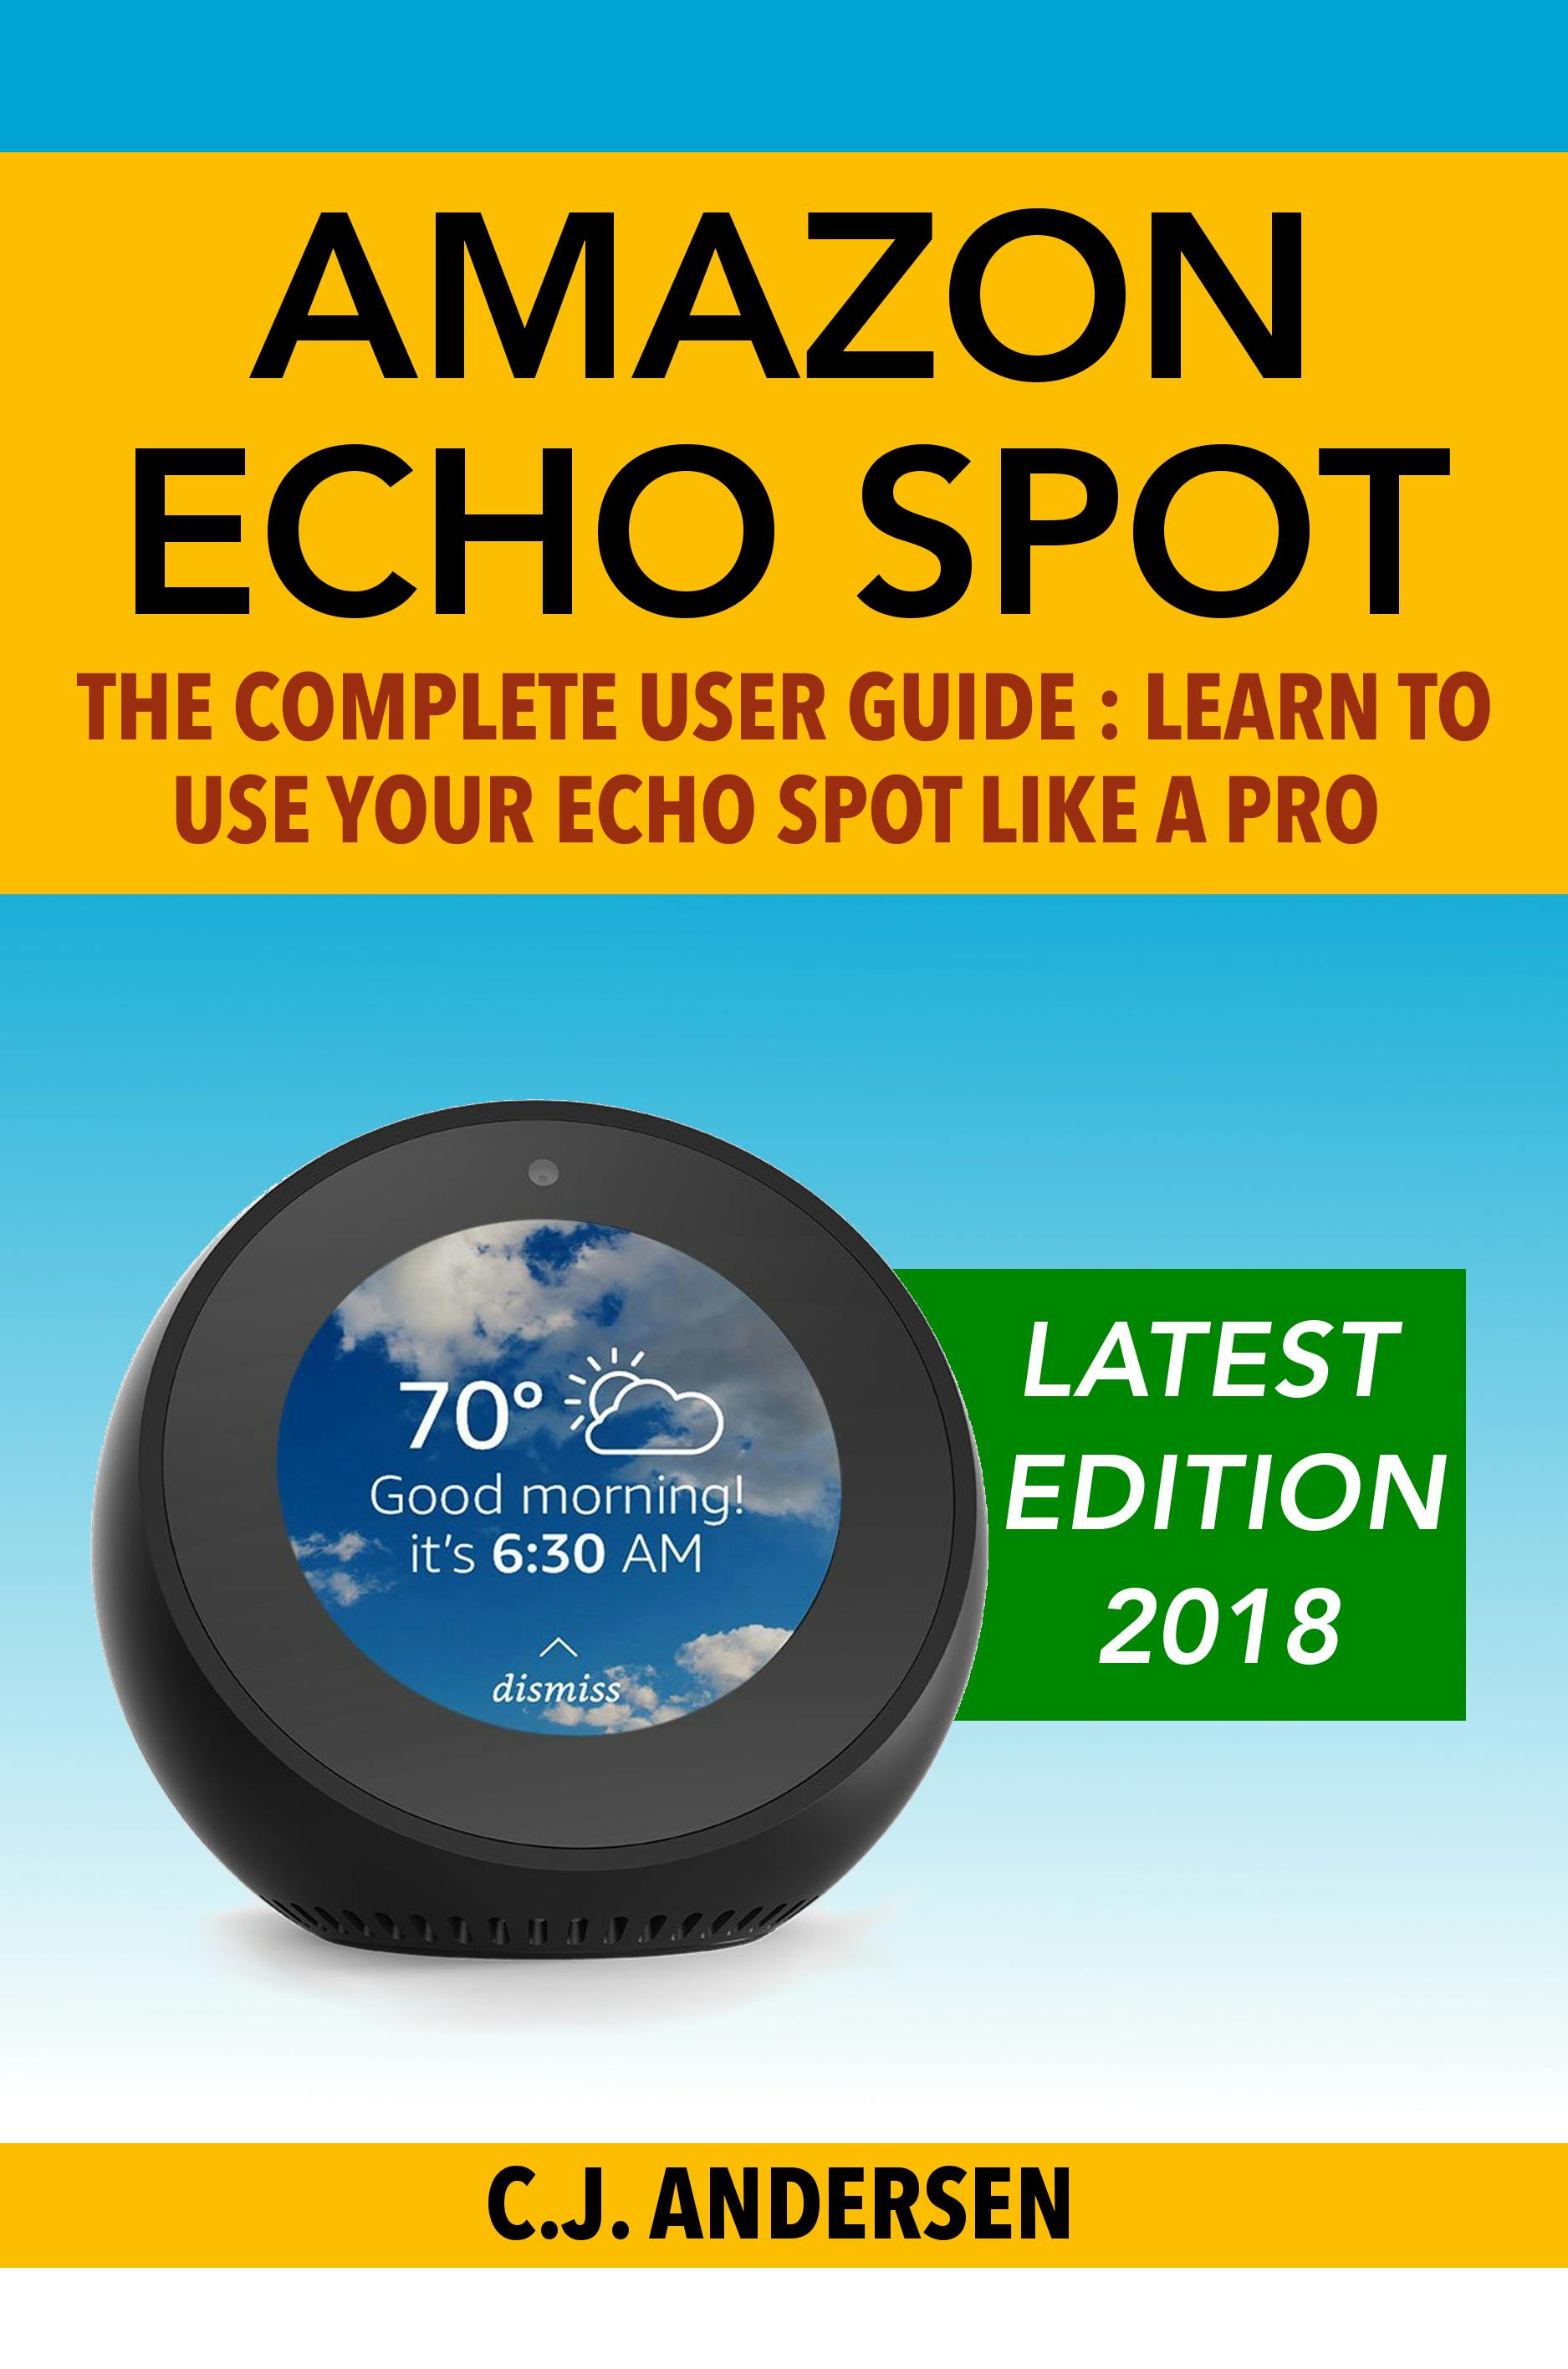 Amazon Echo Spot - The Complete User Guide - undefined